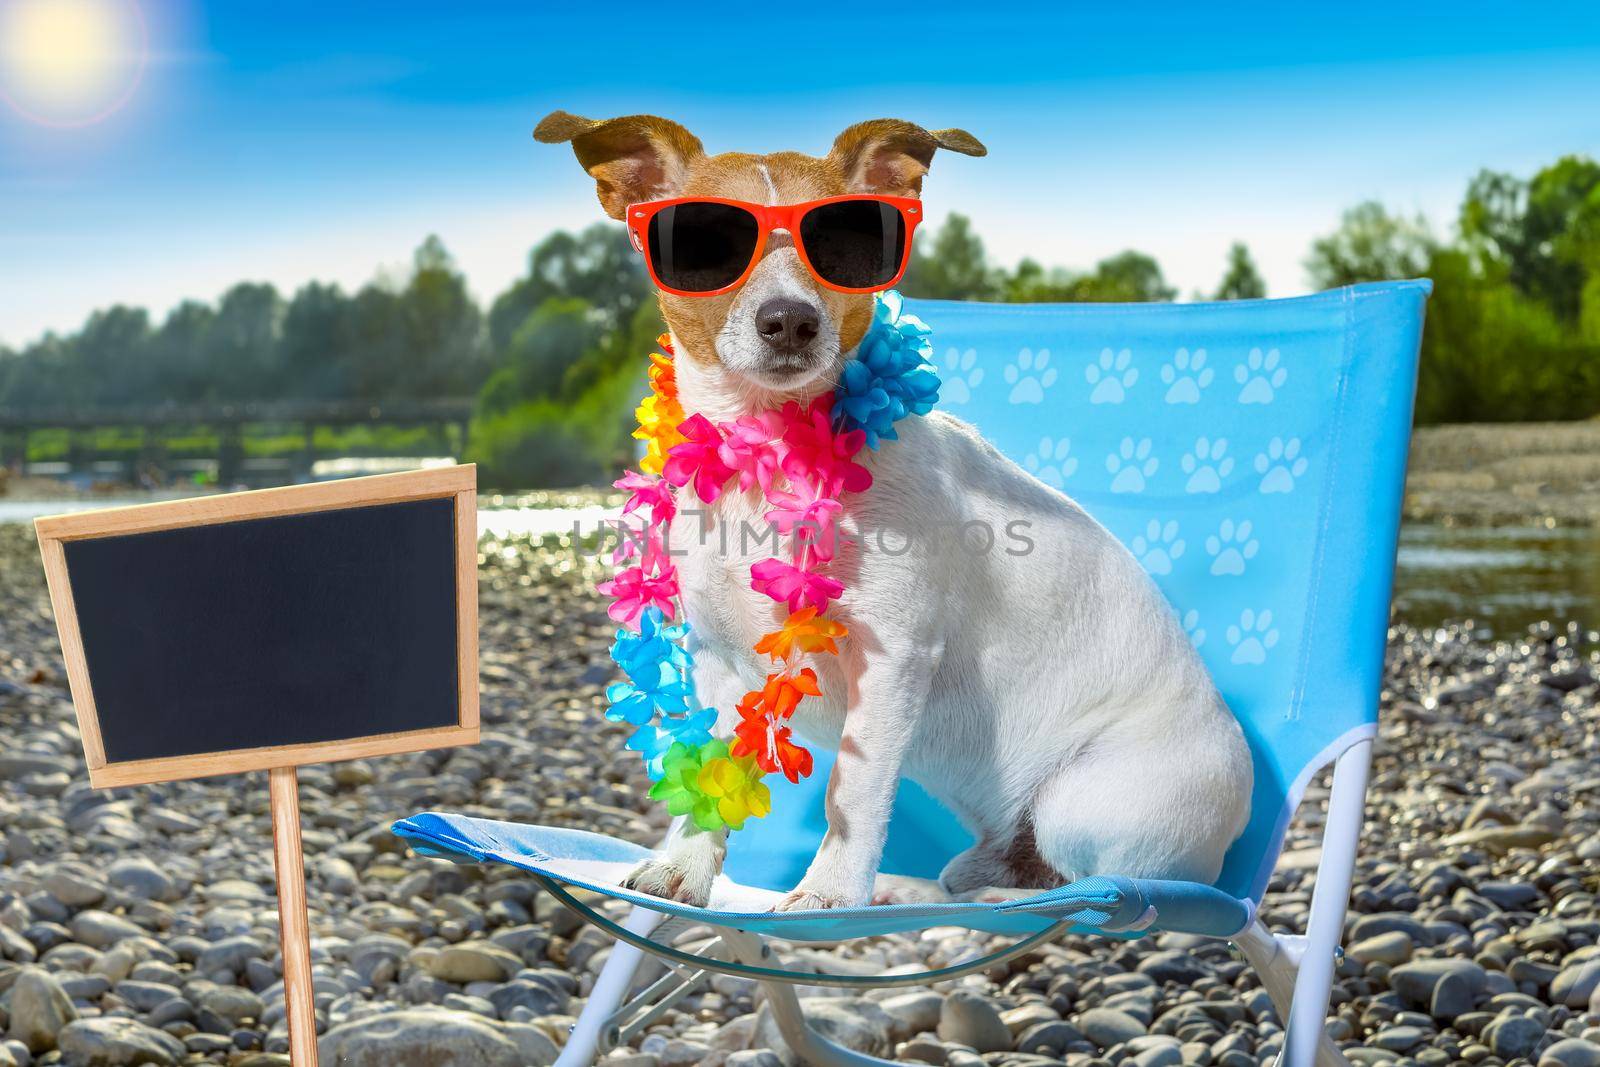 jack russell dog on a  beach chair or hammock at the beach relaxing  on summer vacation holidays, ocean or river  shore as background , banner and placard to the side